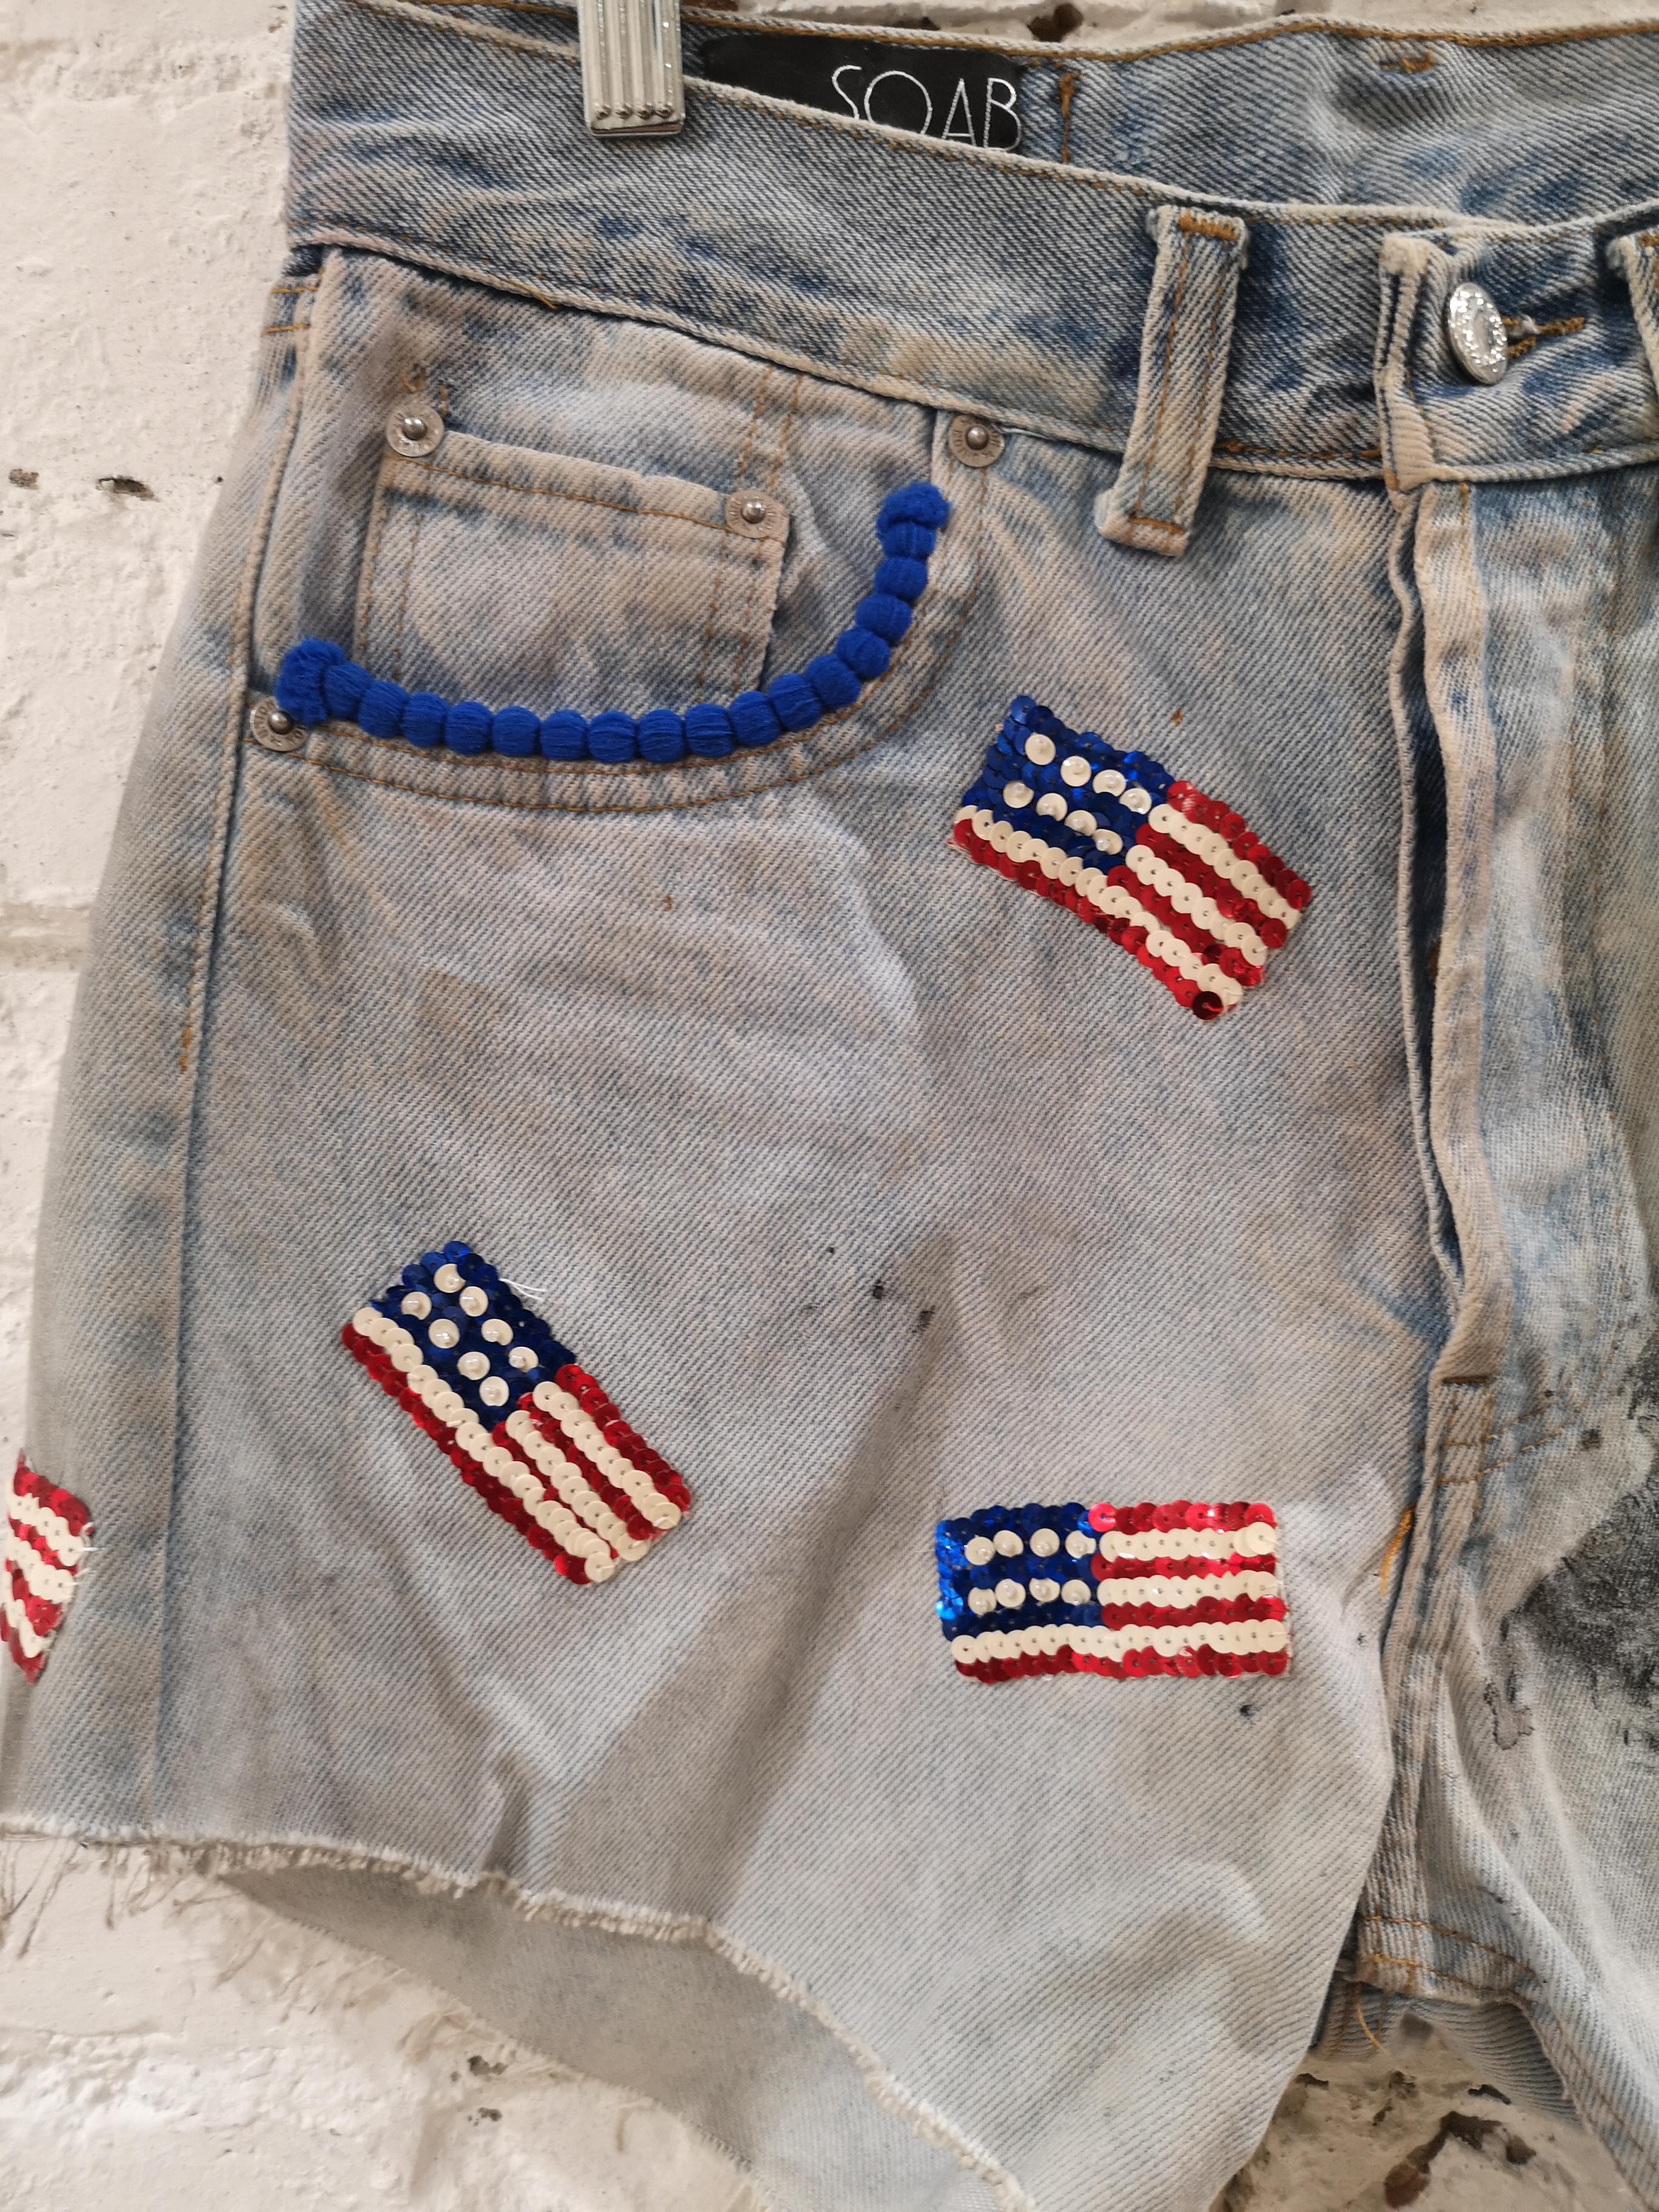 Gray SOAB light blue cotton with USA Sequins flag short